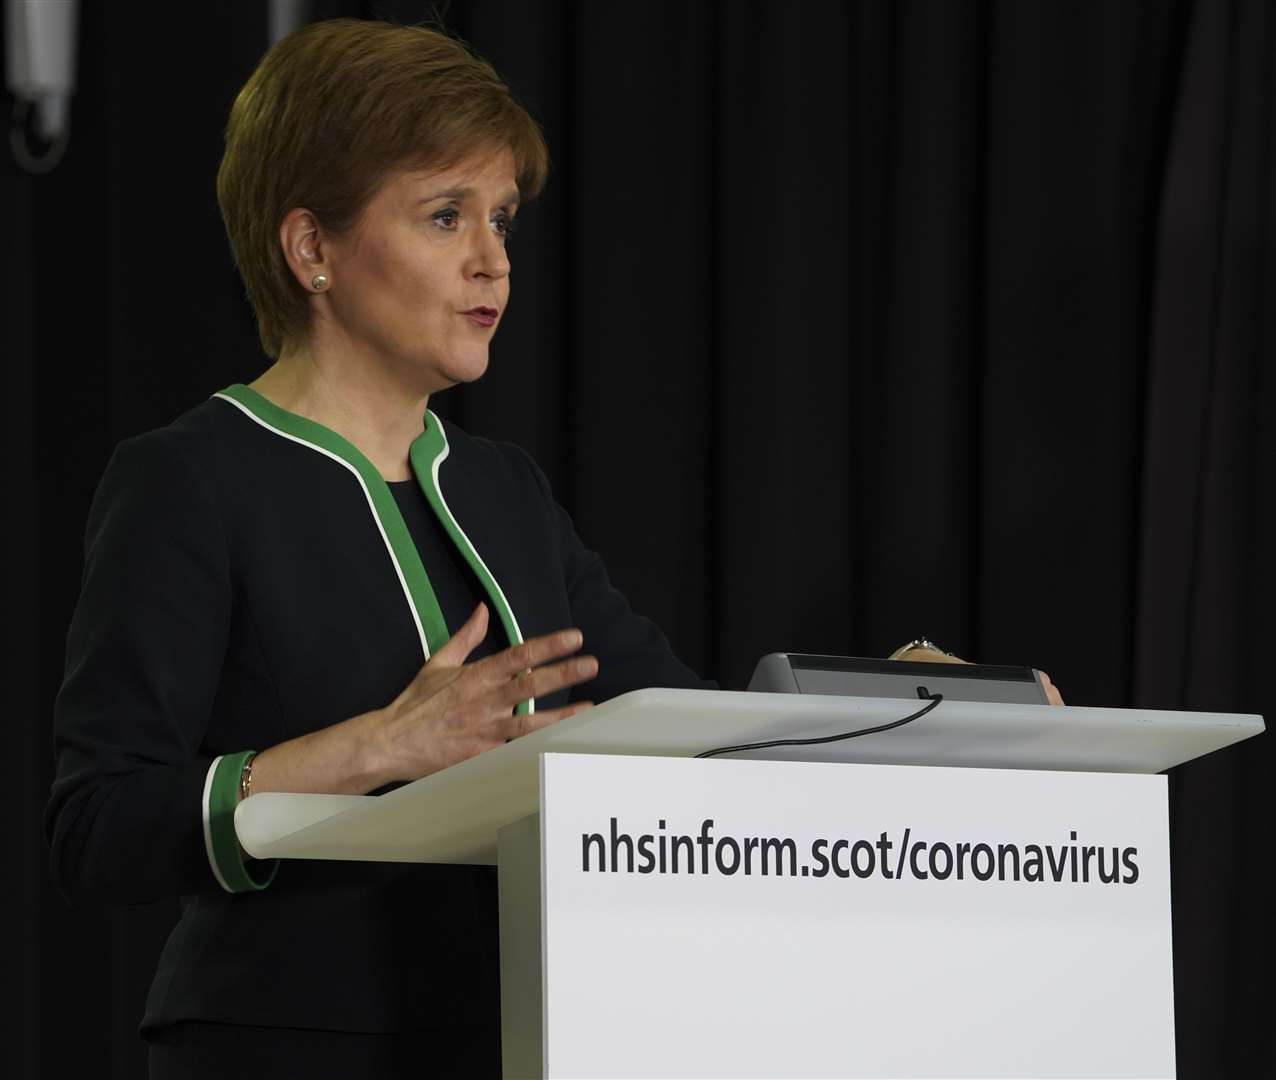 Nicola Sturgeon said the latest information gives as full a picture as possible of the toll being taken by coronavirus.